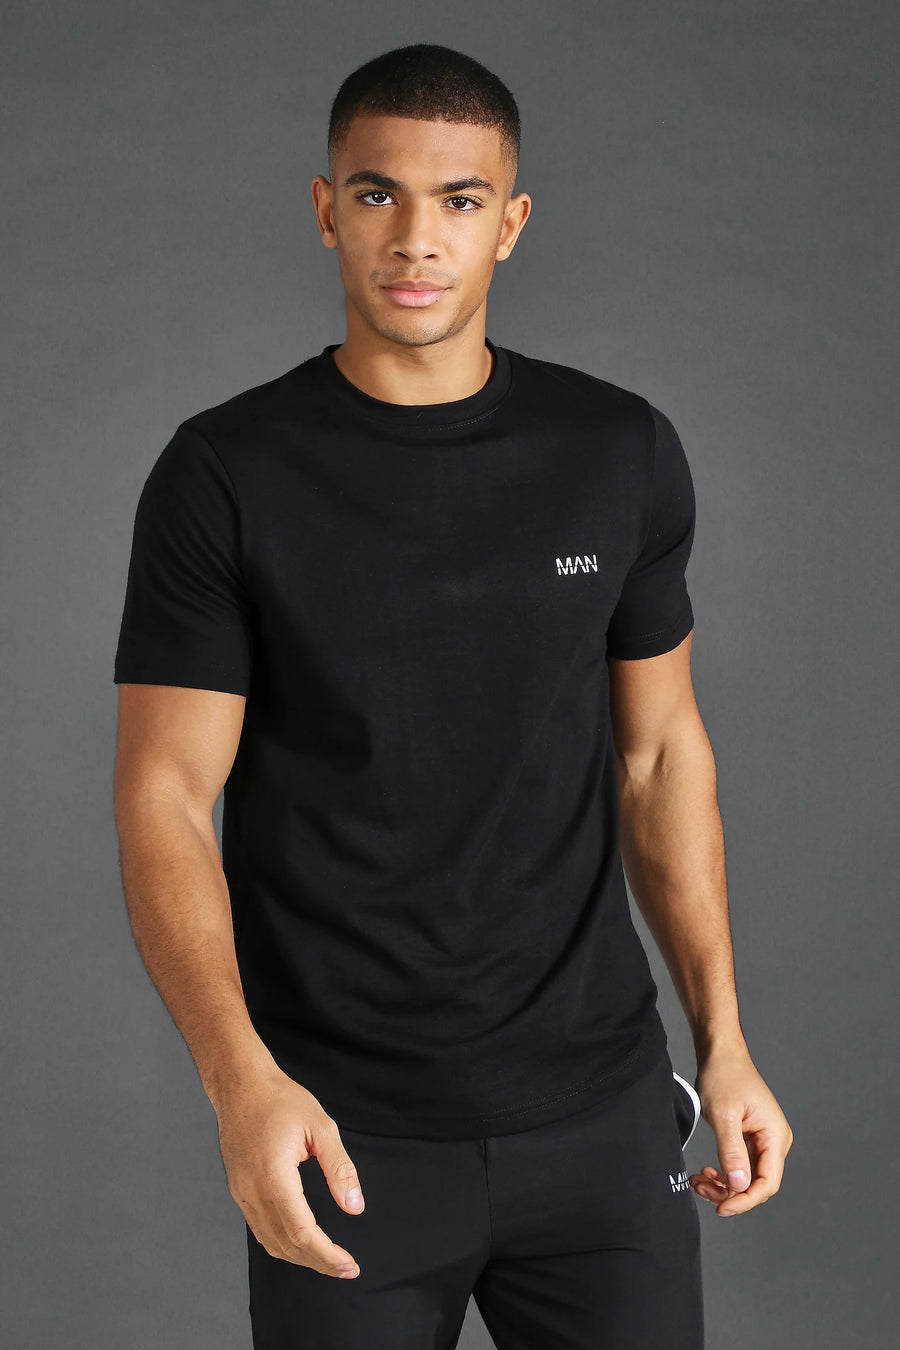 MAN Muscles FIT STRETCHABLE LOGO T-SHIRT